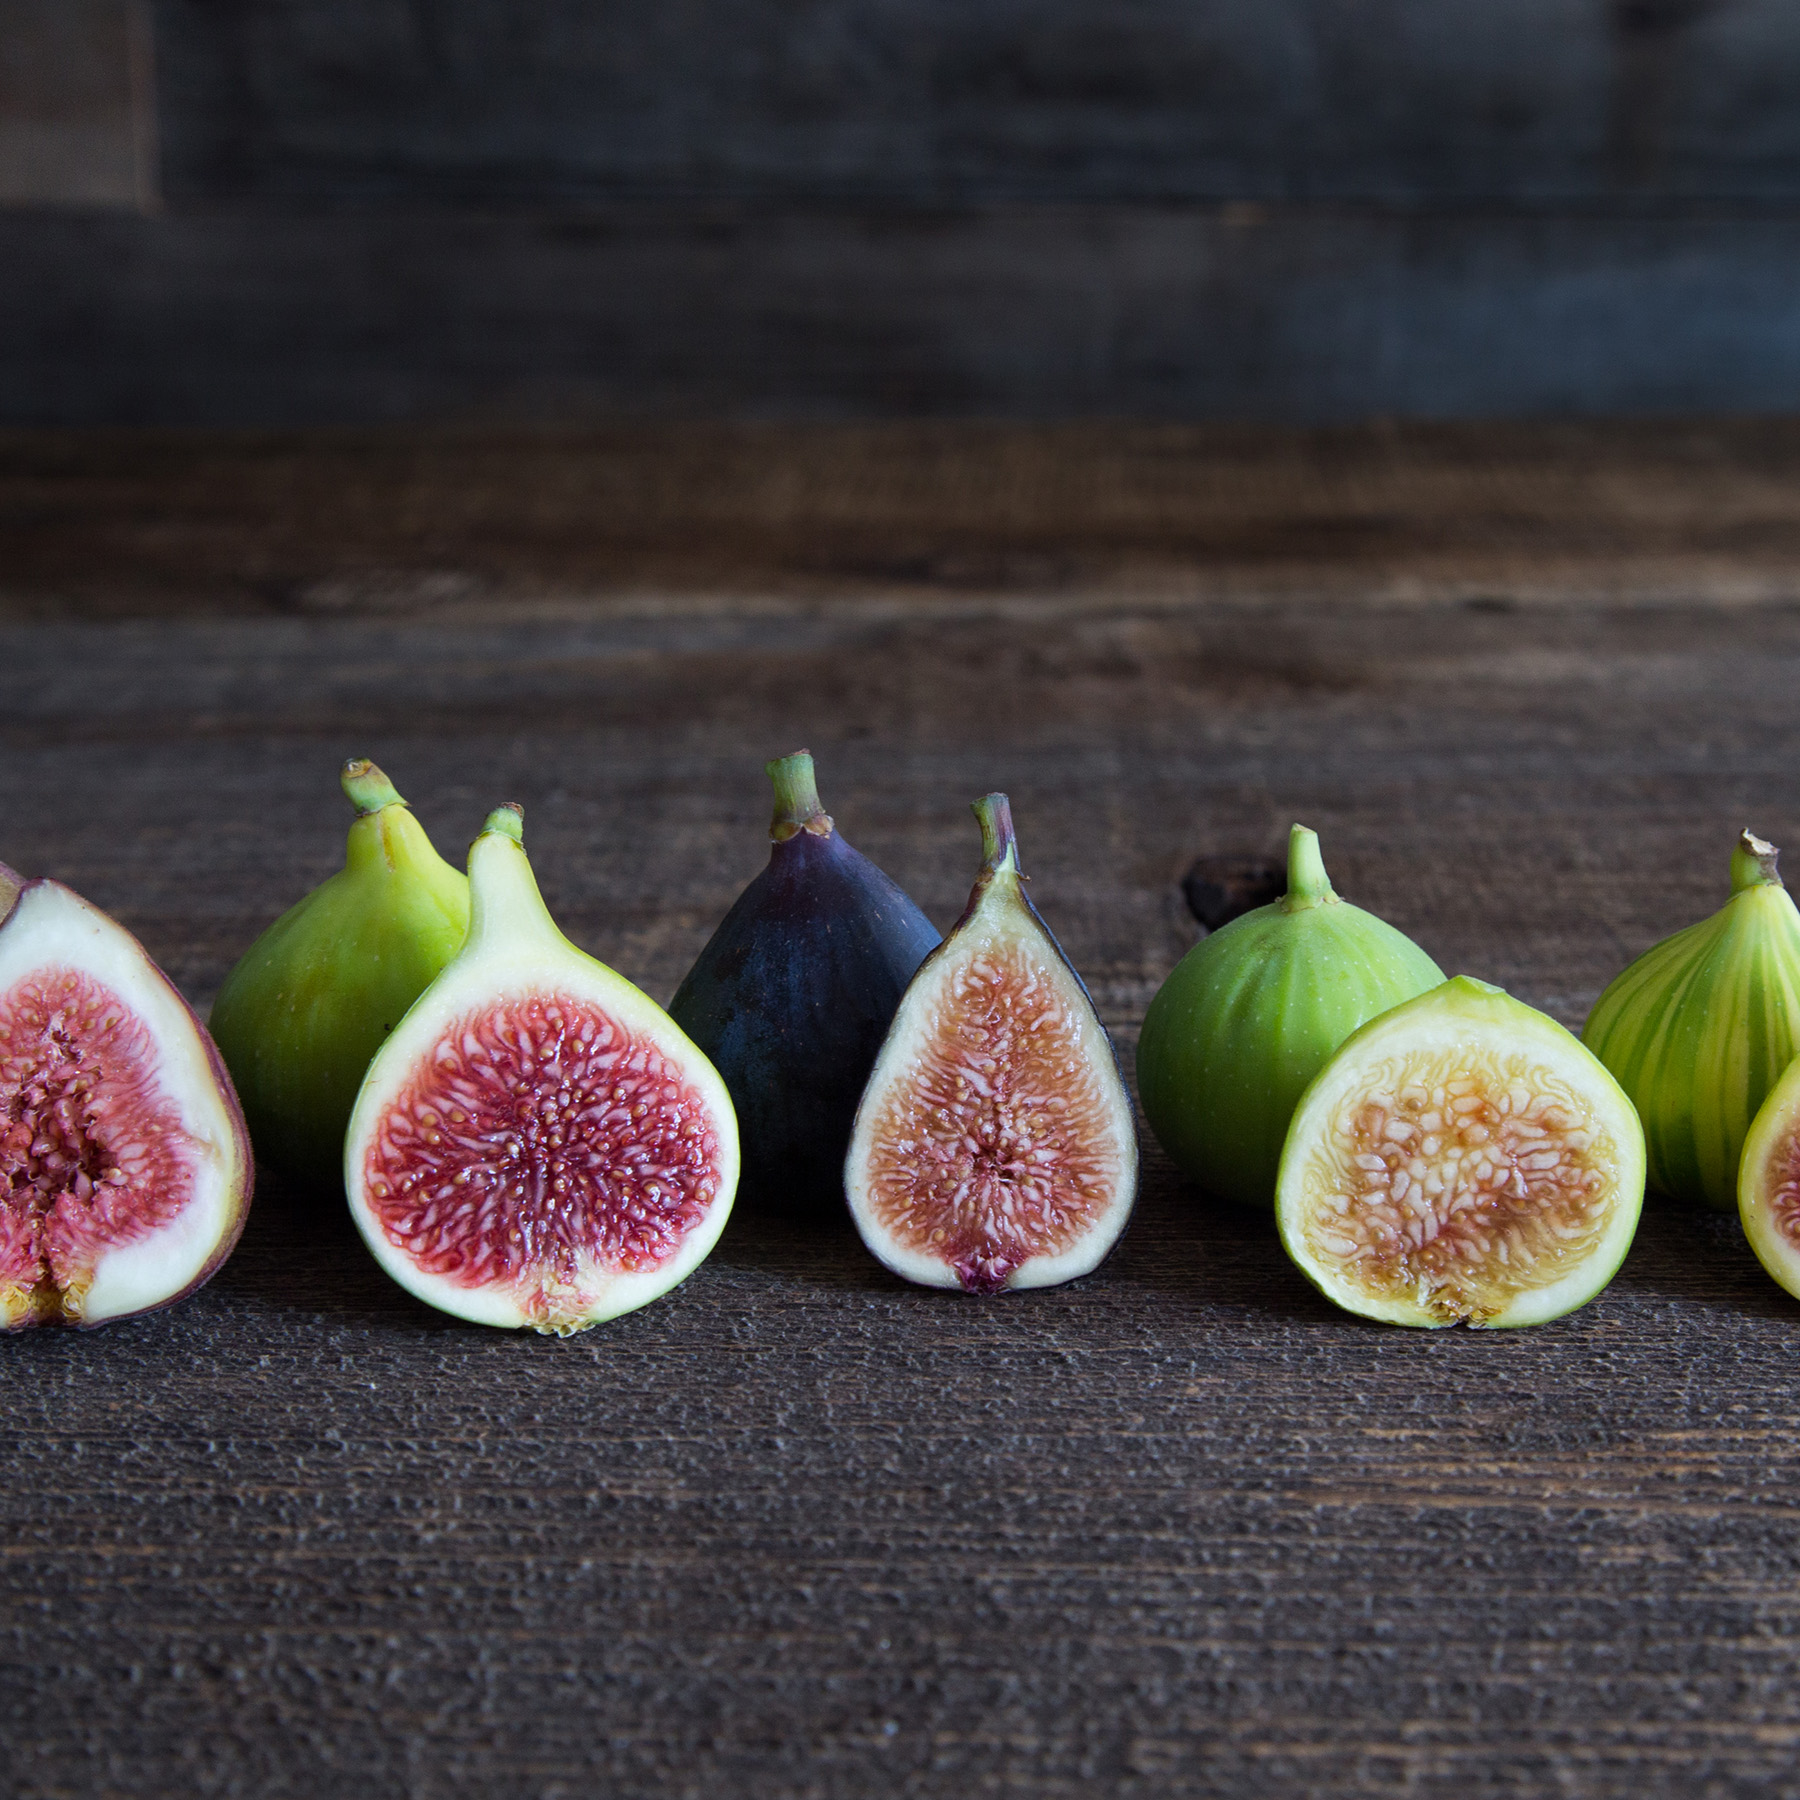 There are five primary types of California Fresh Figs (from left to right): Brown Turkey, Kadota, Mission, Sierra and Tiger.